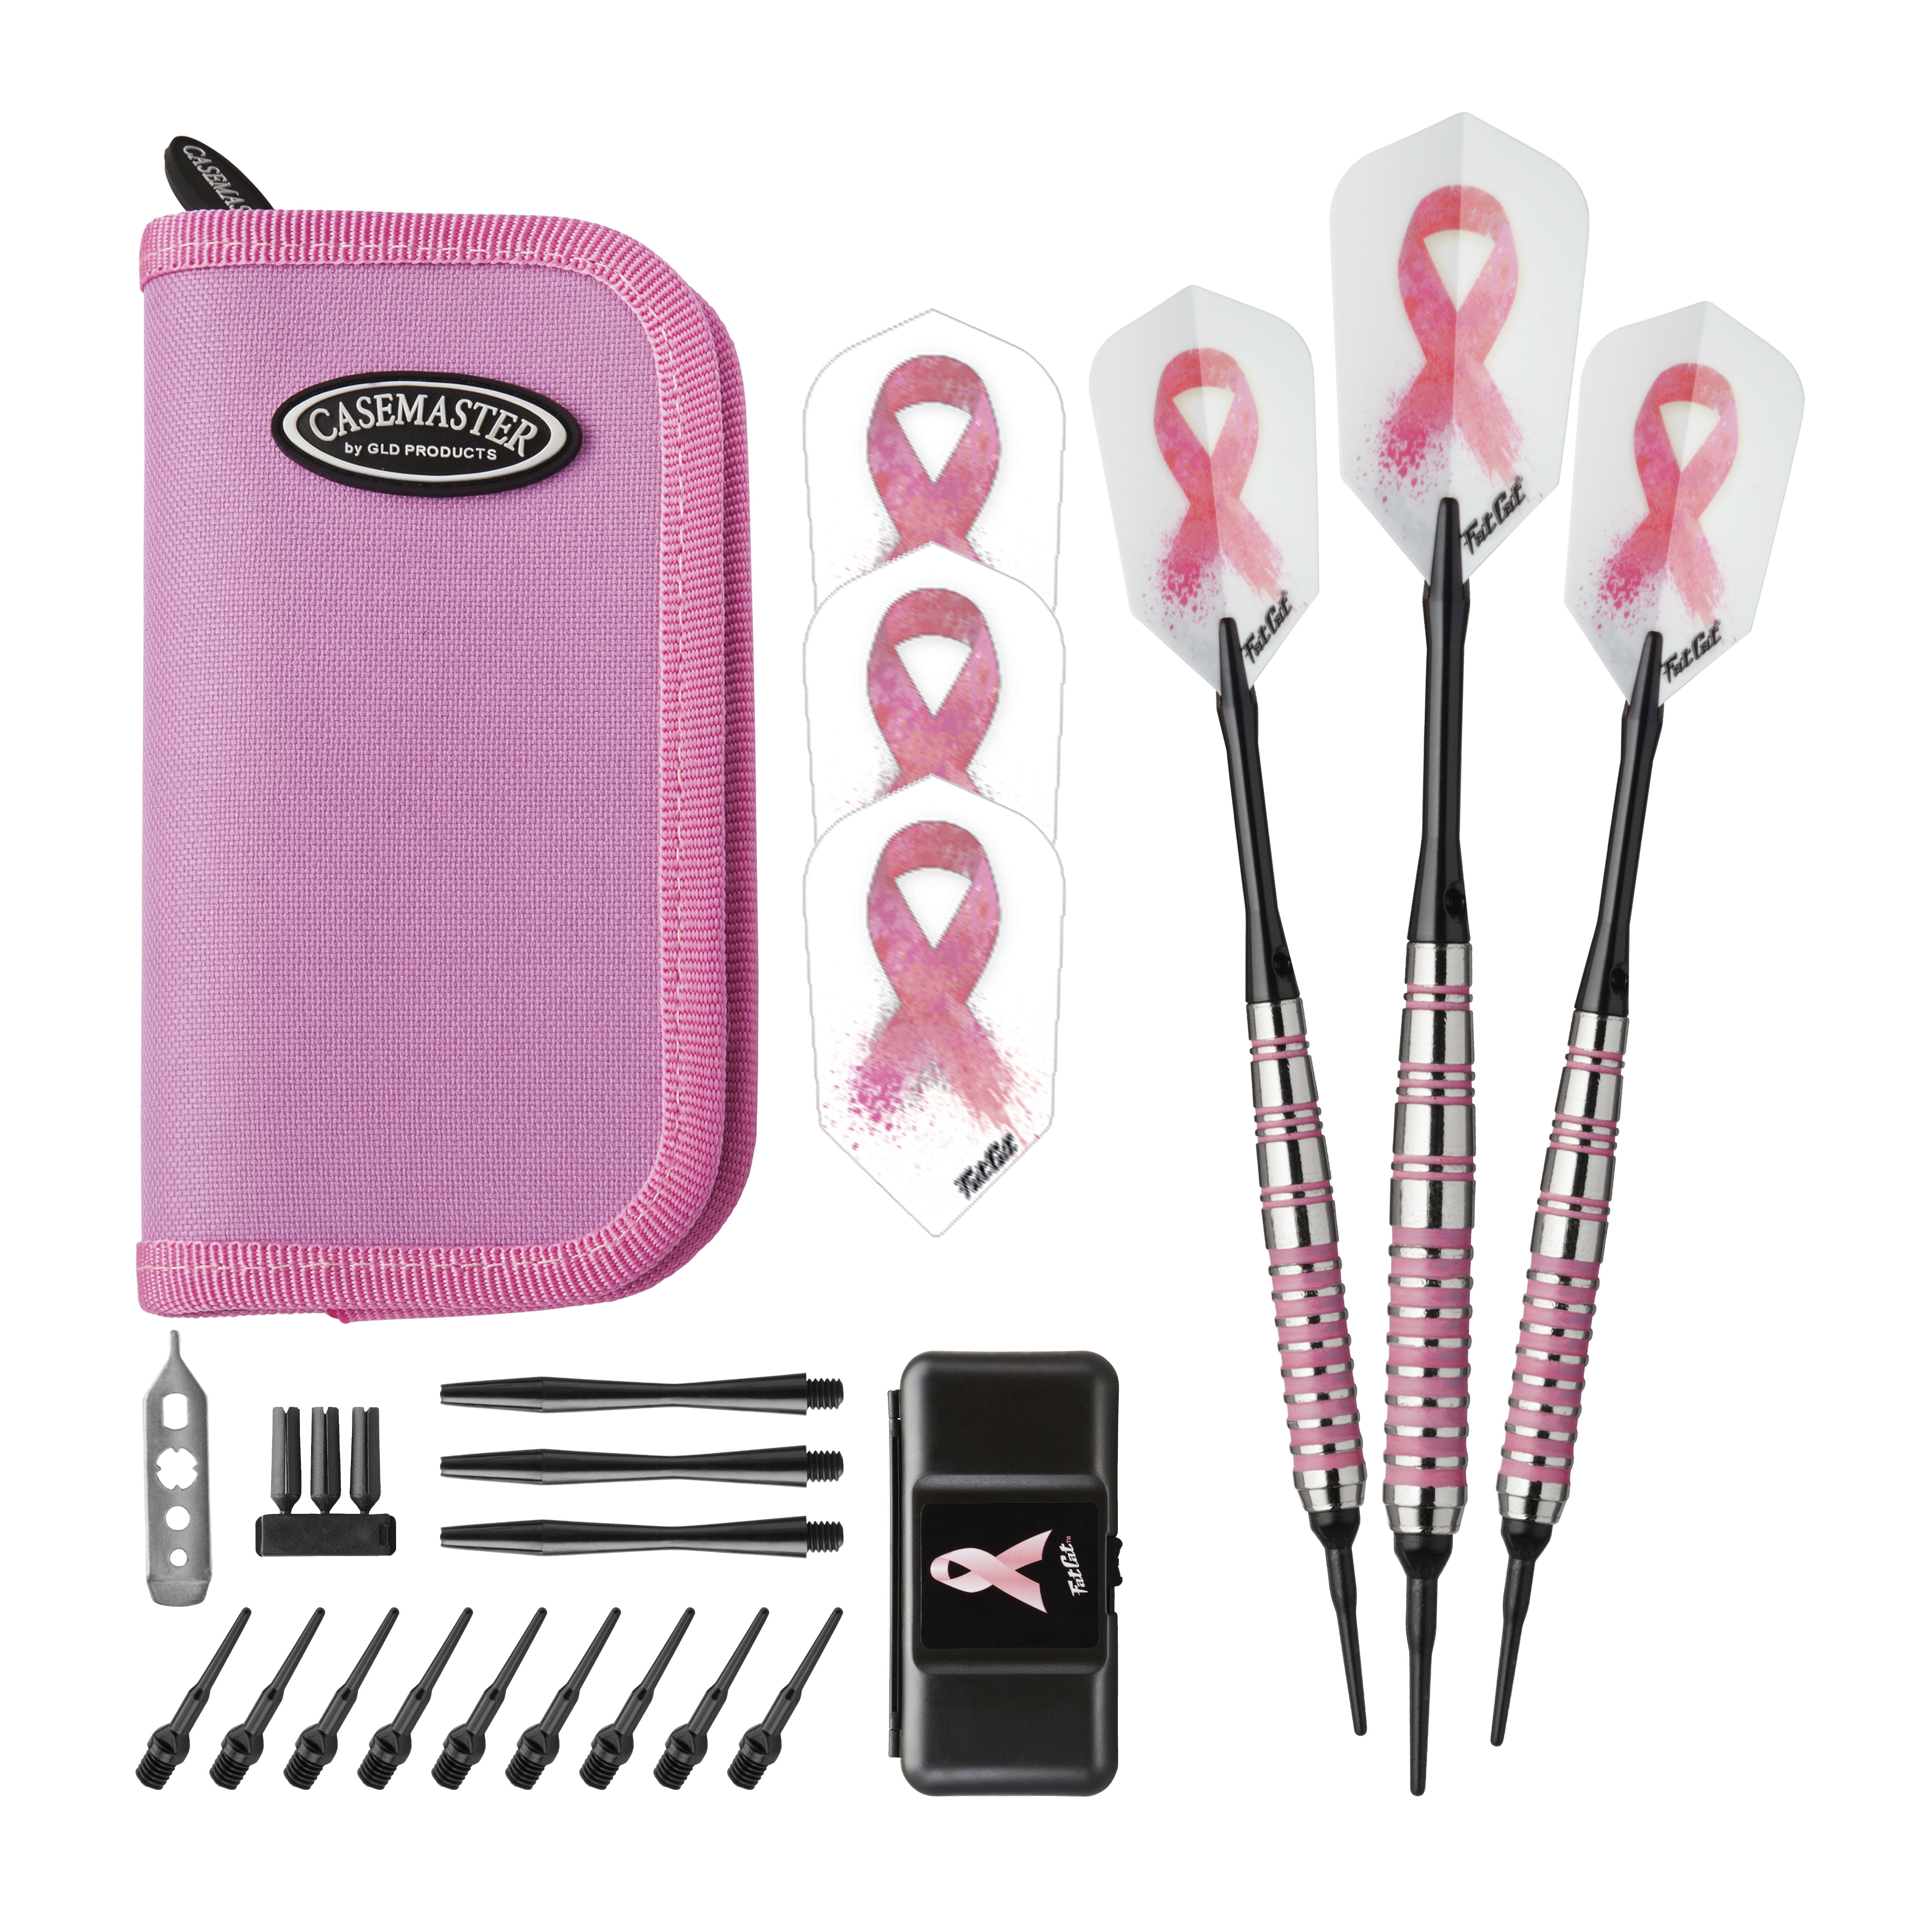 Fat Cat Pink Lady 20g Steel Tip Darts 22-1420-20 22142020 W// for sale online